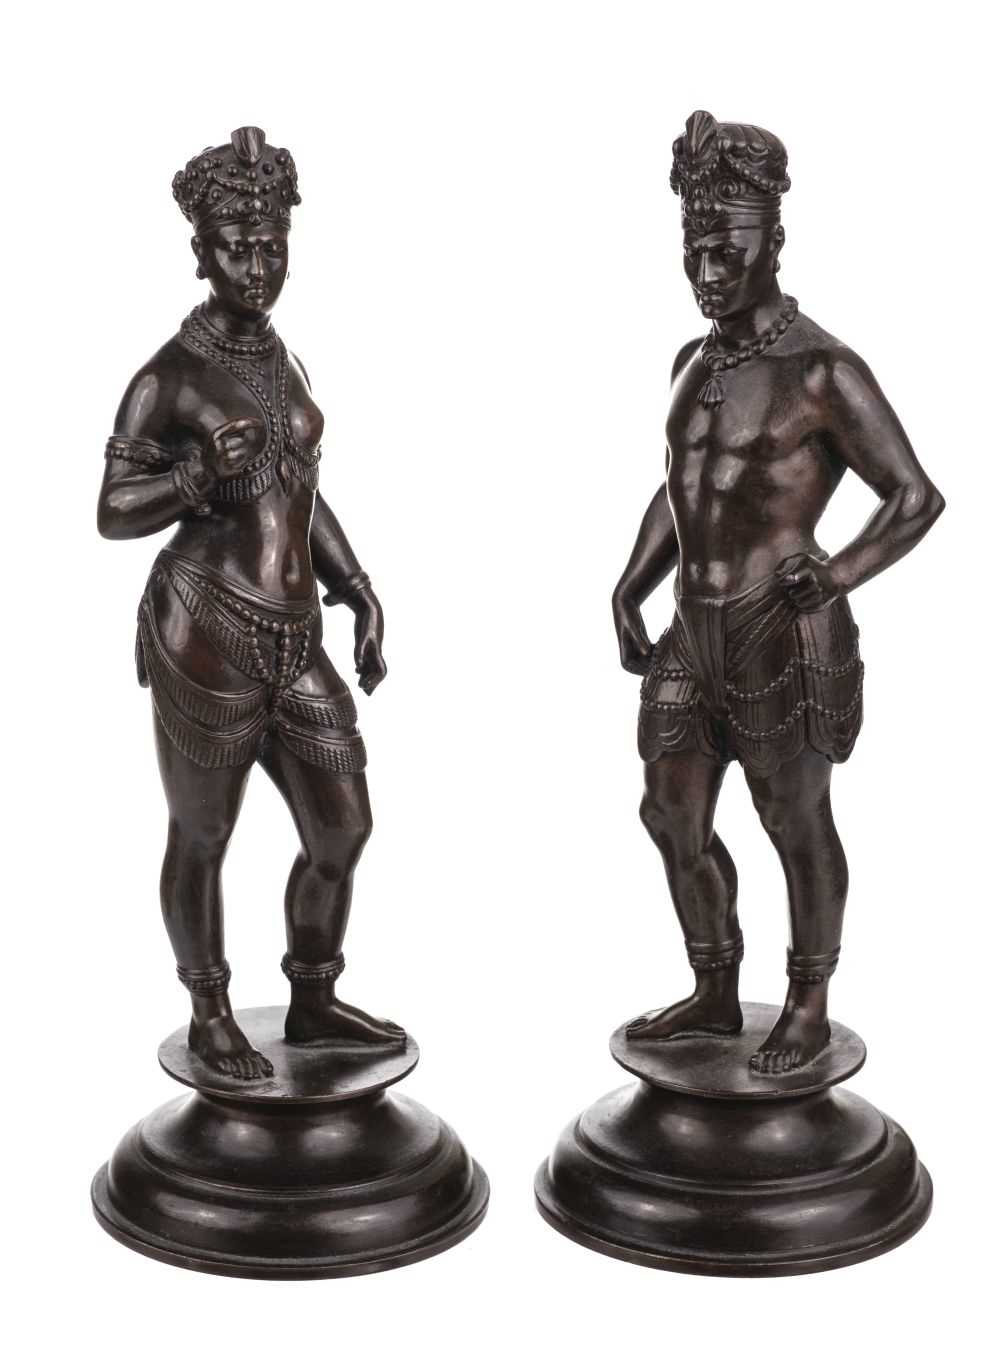 Lot 427 - Indian School. A pair of late 19th century Indian bronze figures